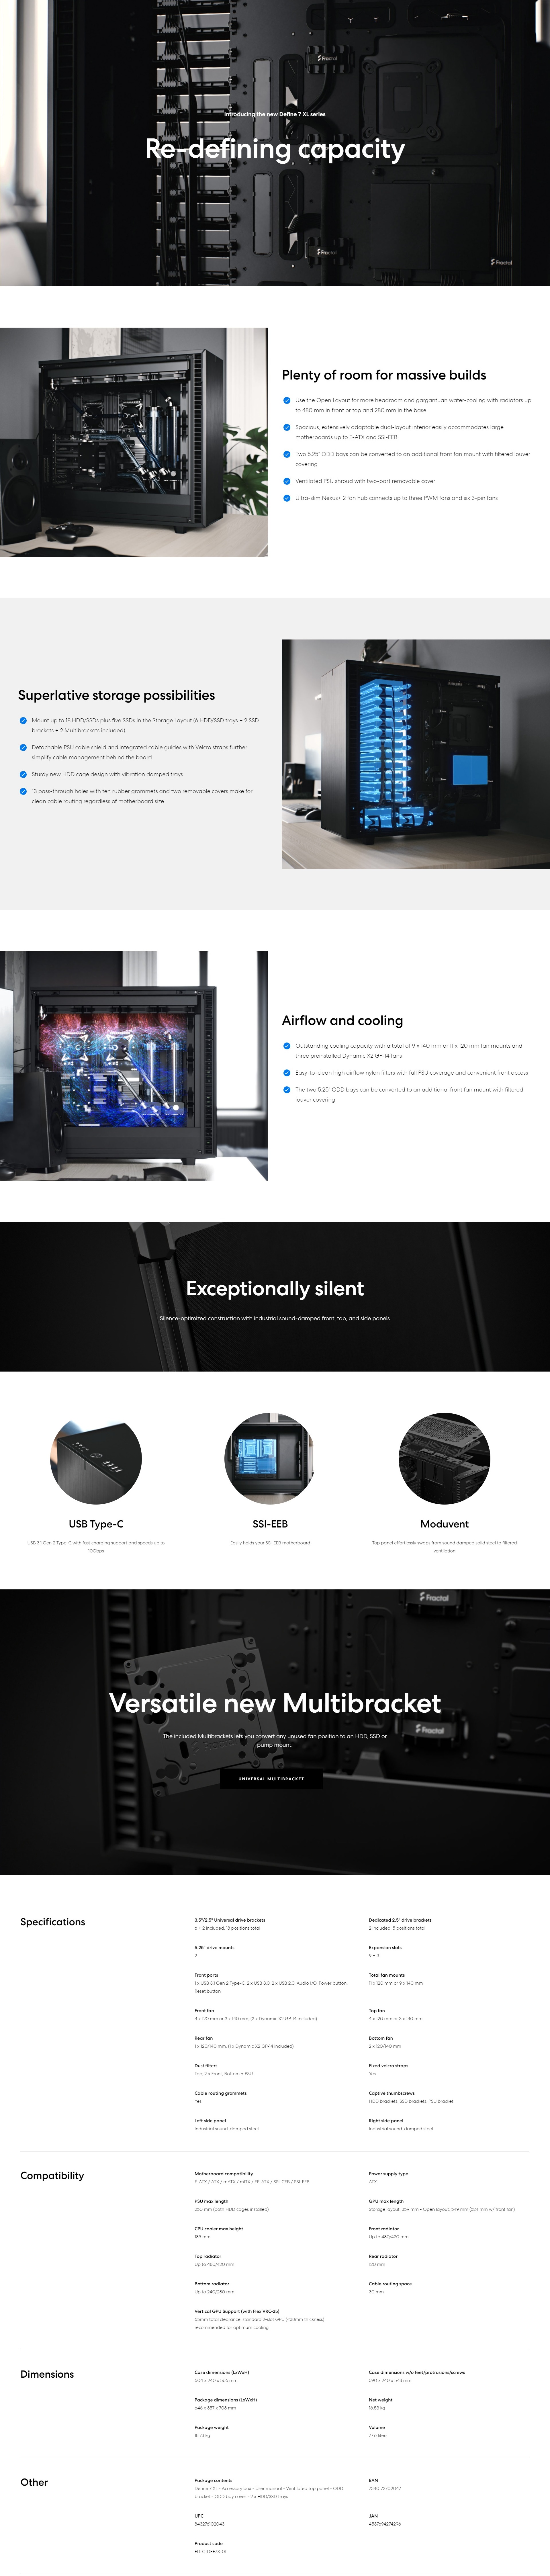 A large marketing image providing additional information about the product Fractal Design Define 7 XL Full Tower Case - Black - Additional alt info not provided